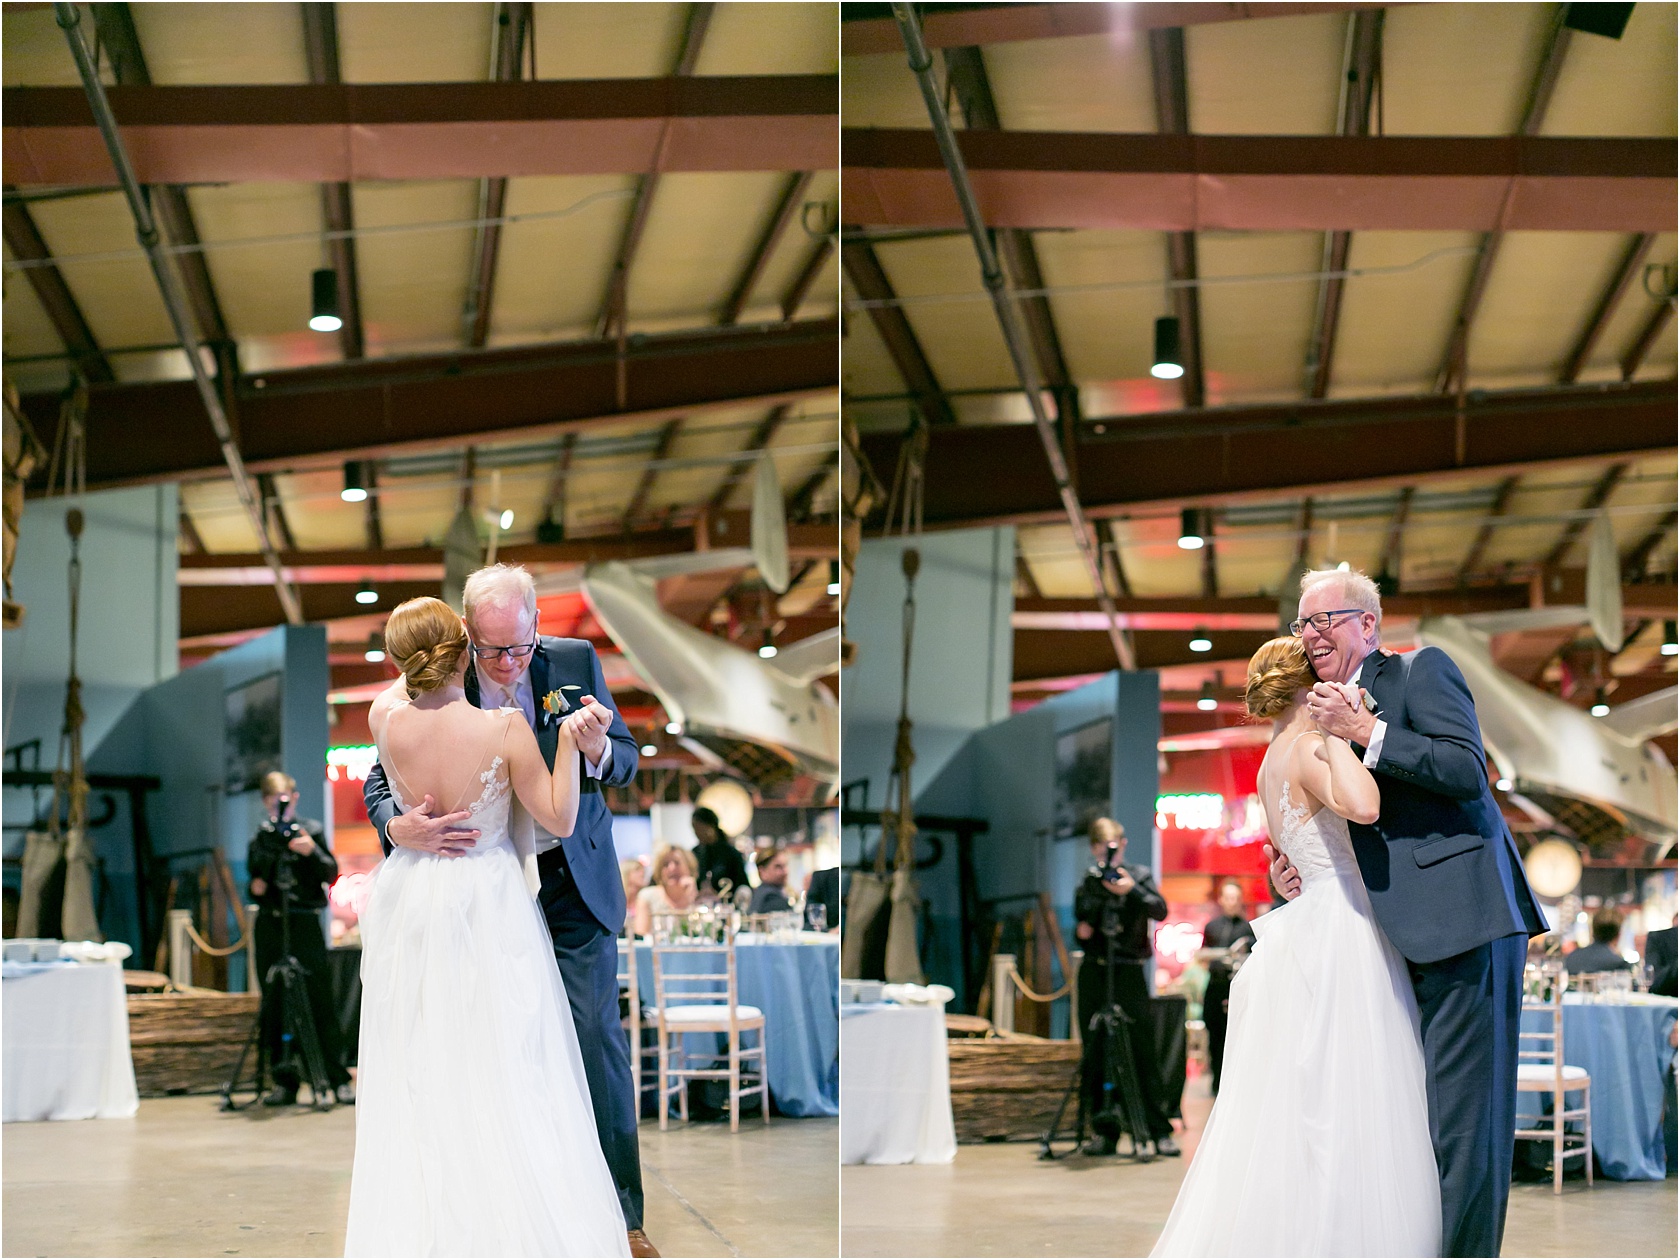 Rowland Baltimore Museum of Industry Wedding Living Radiant Photography photos_0152.jpg